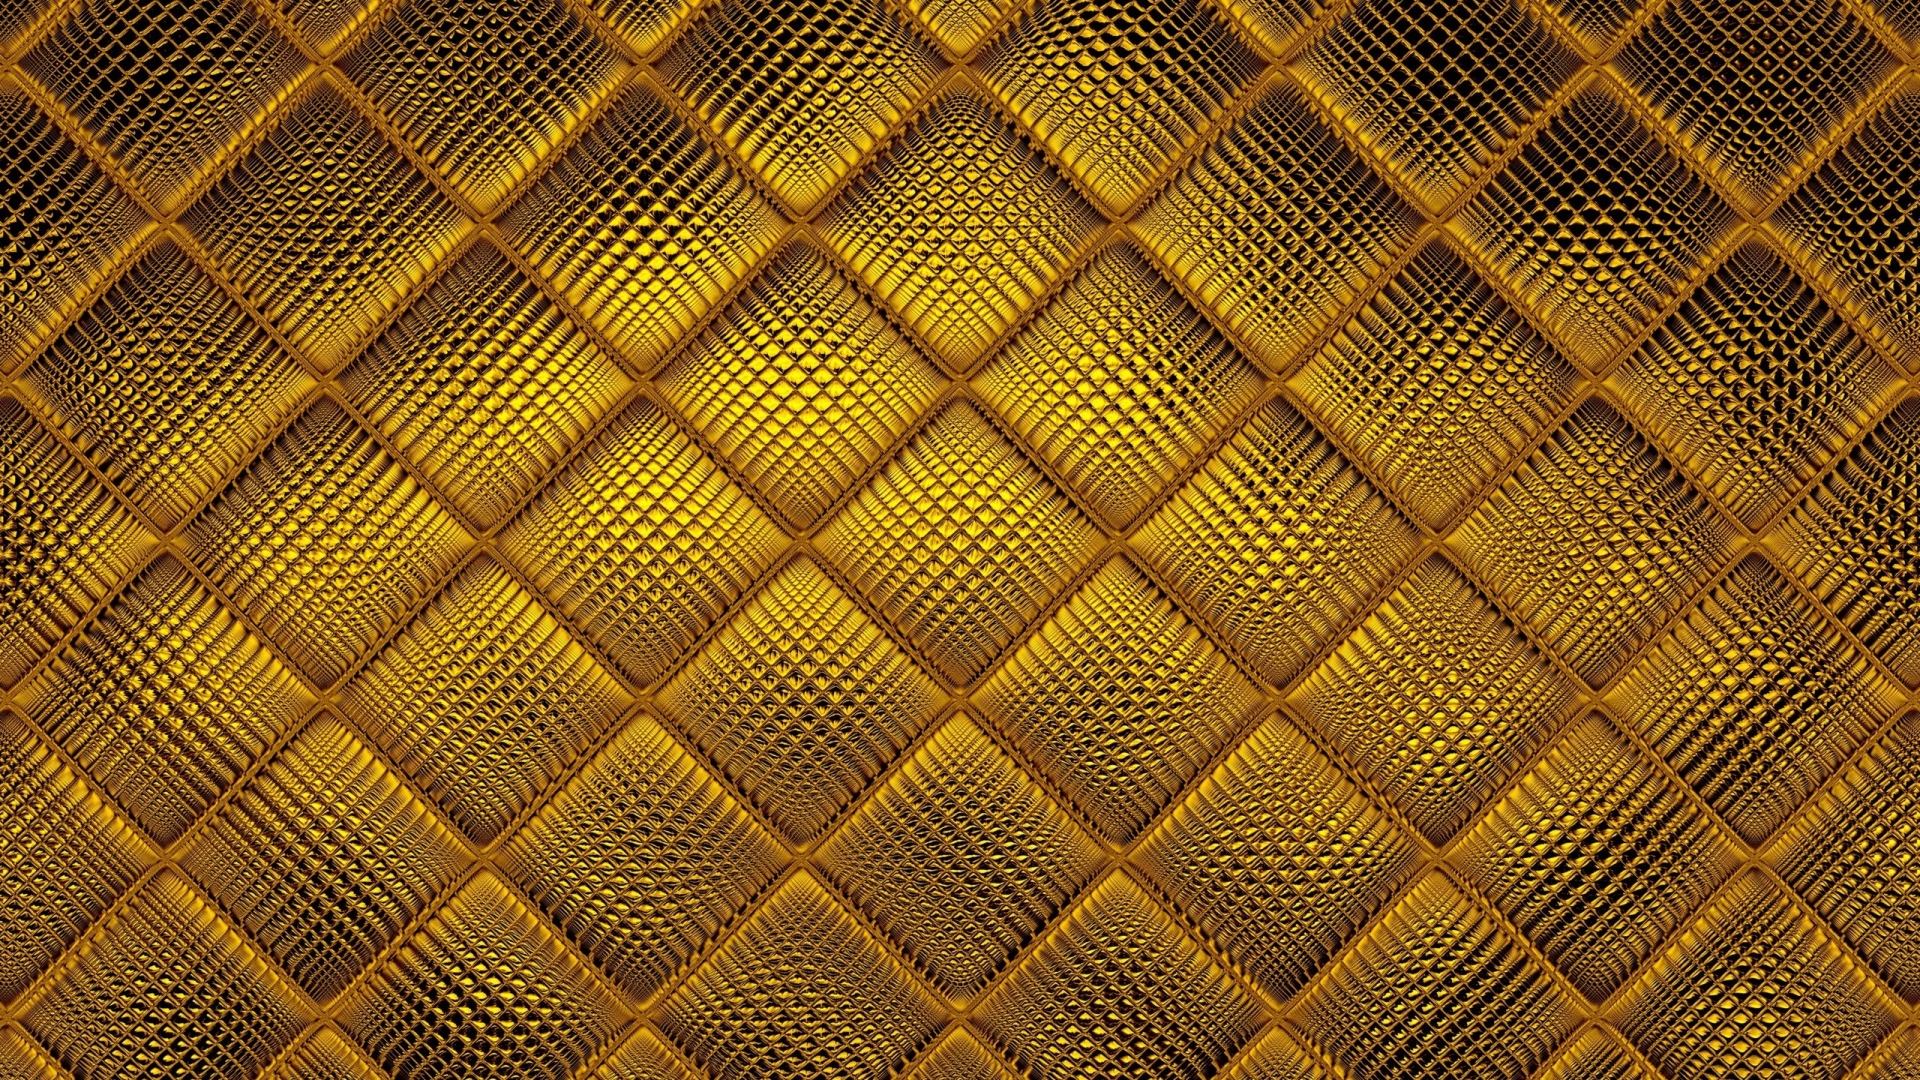 Gold Abstract Texture for 1920 x 1080 HDTV 1080p resolution